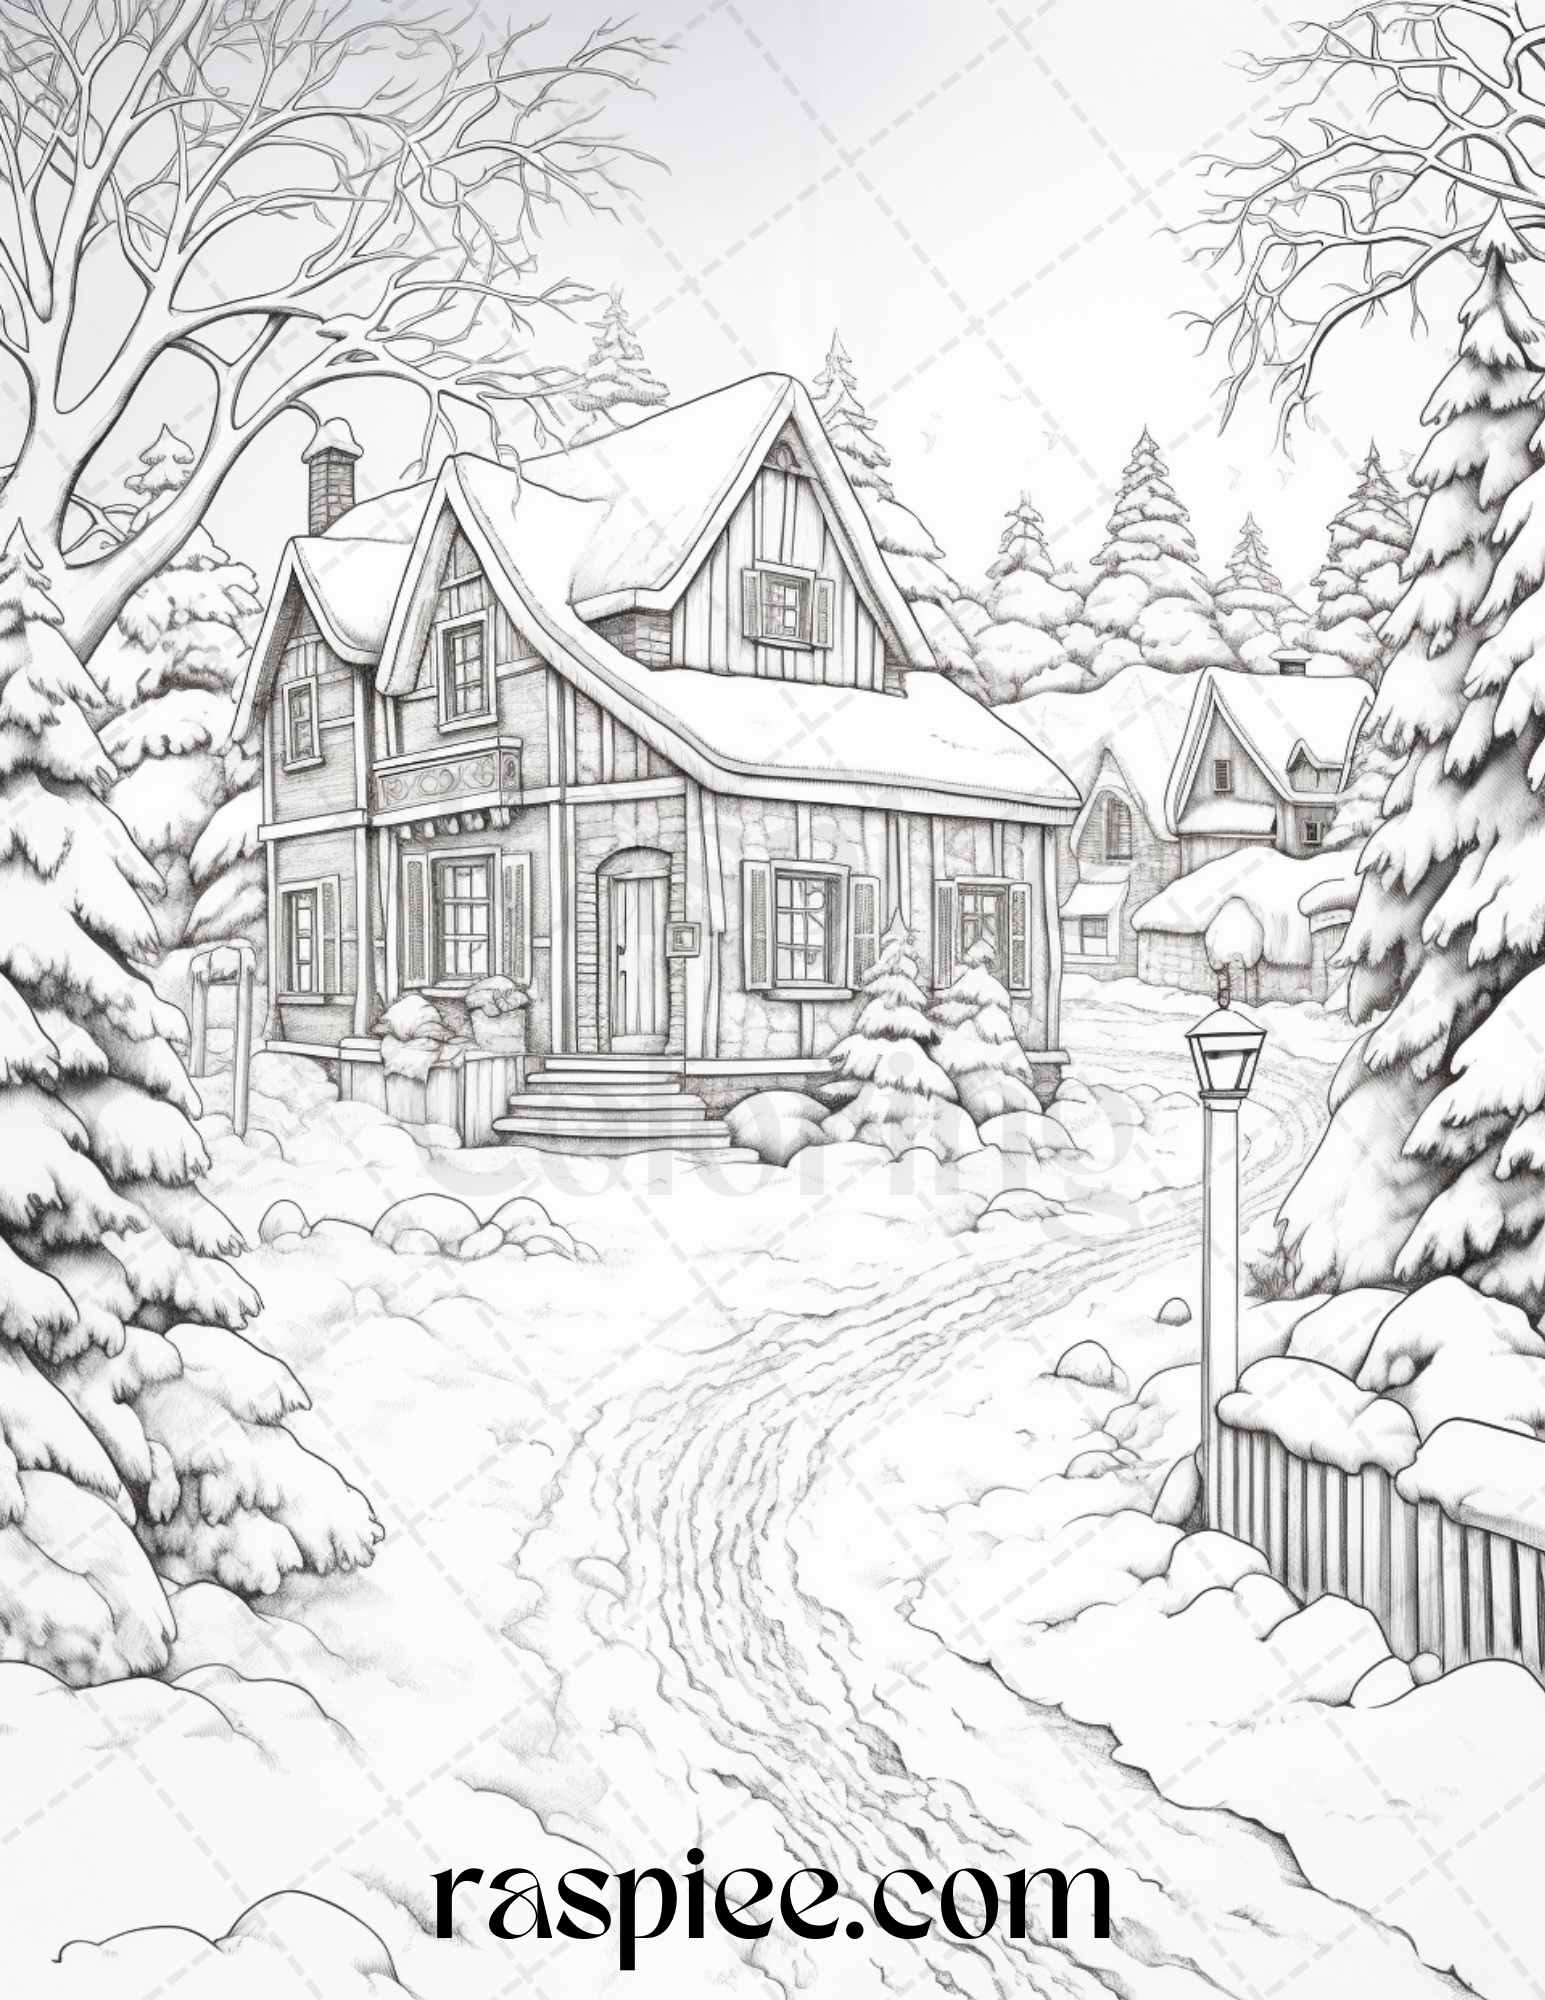 Relaxing Winter Coloring Book: Large Print Coloring Pages for Adults, Featuring Relaxing Beautiful Christmas Scenes .. [Book]